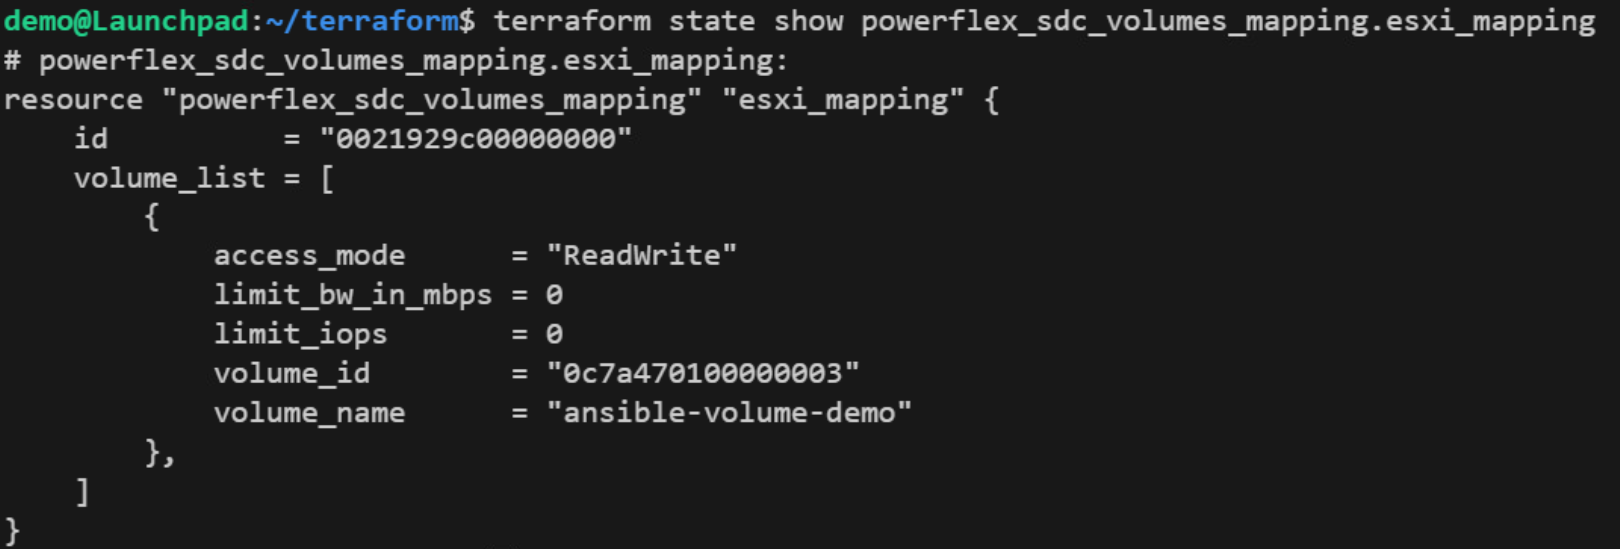 Showing the Terraform state for the SDC_Volumes_Mapping resource after the import step